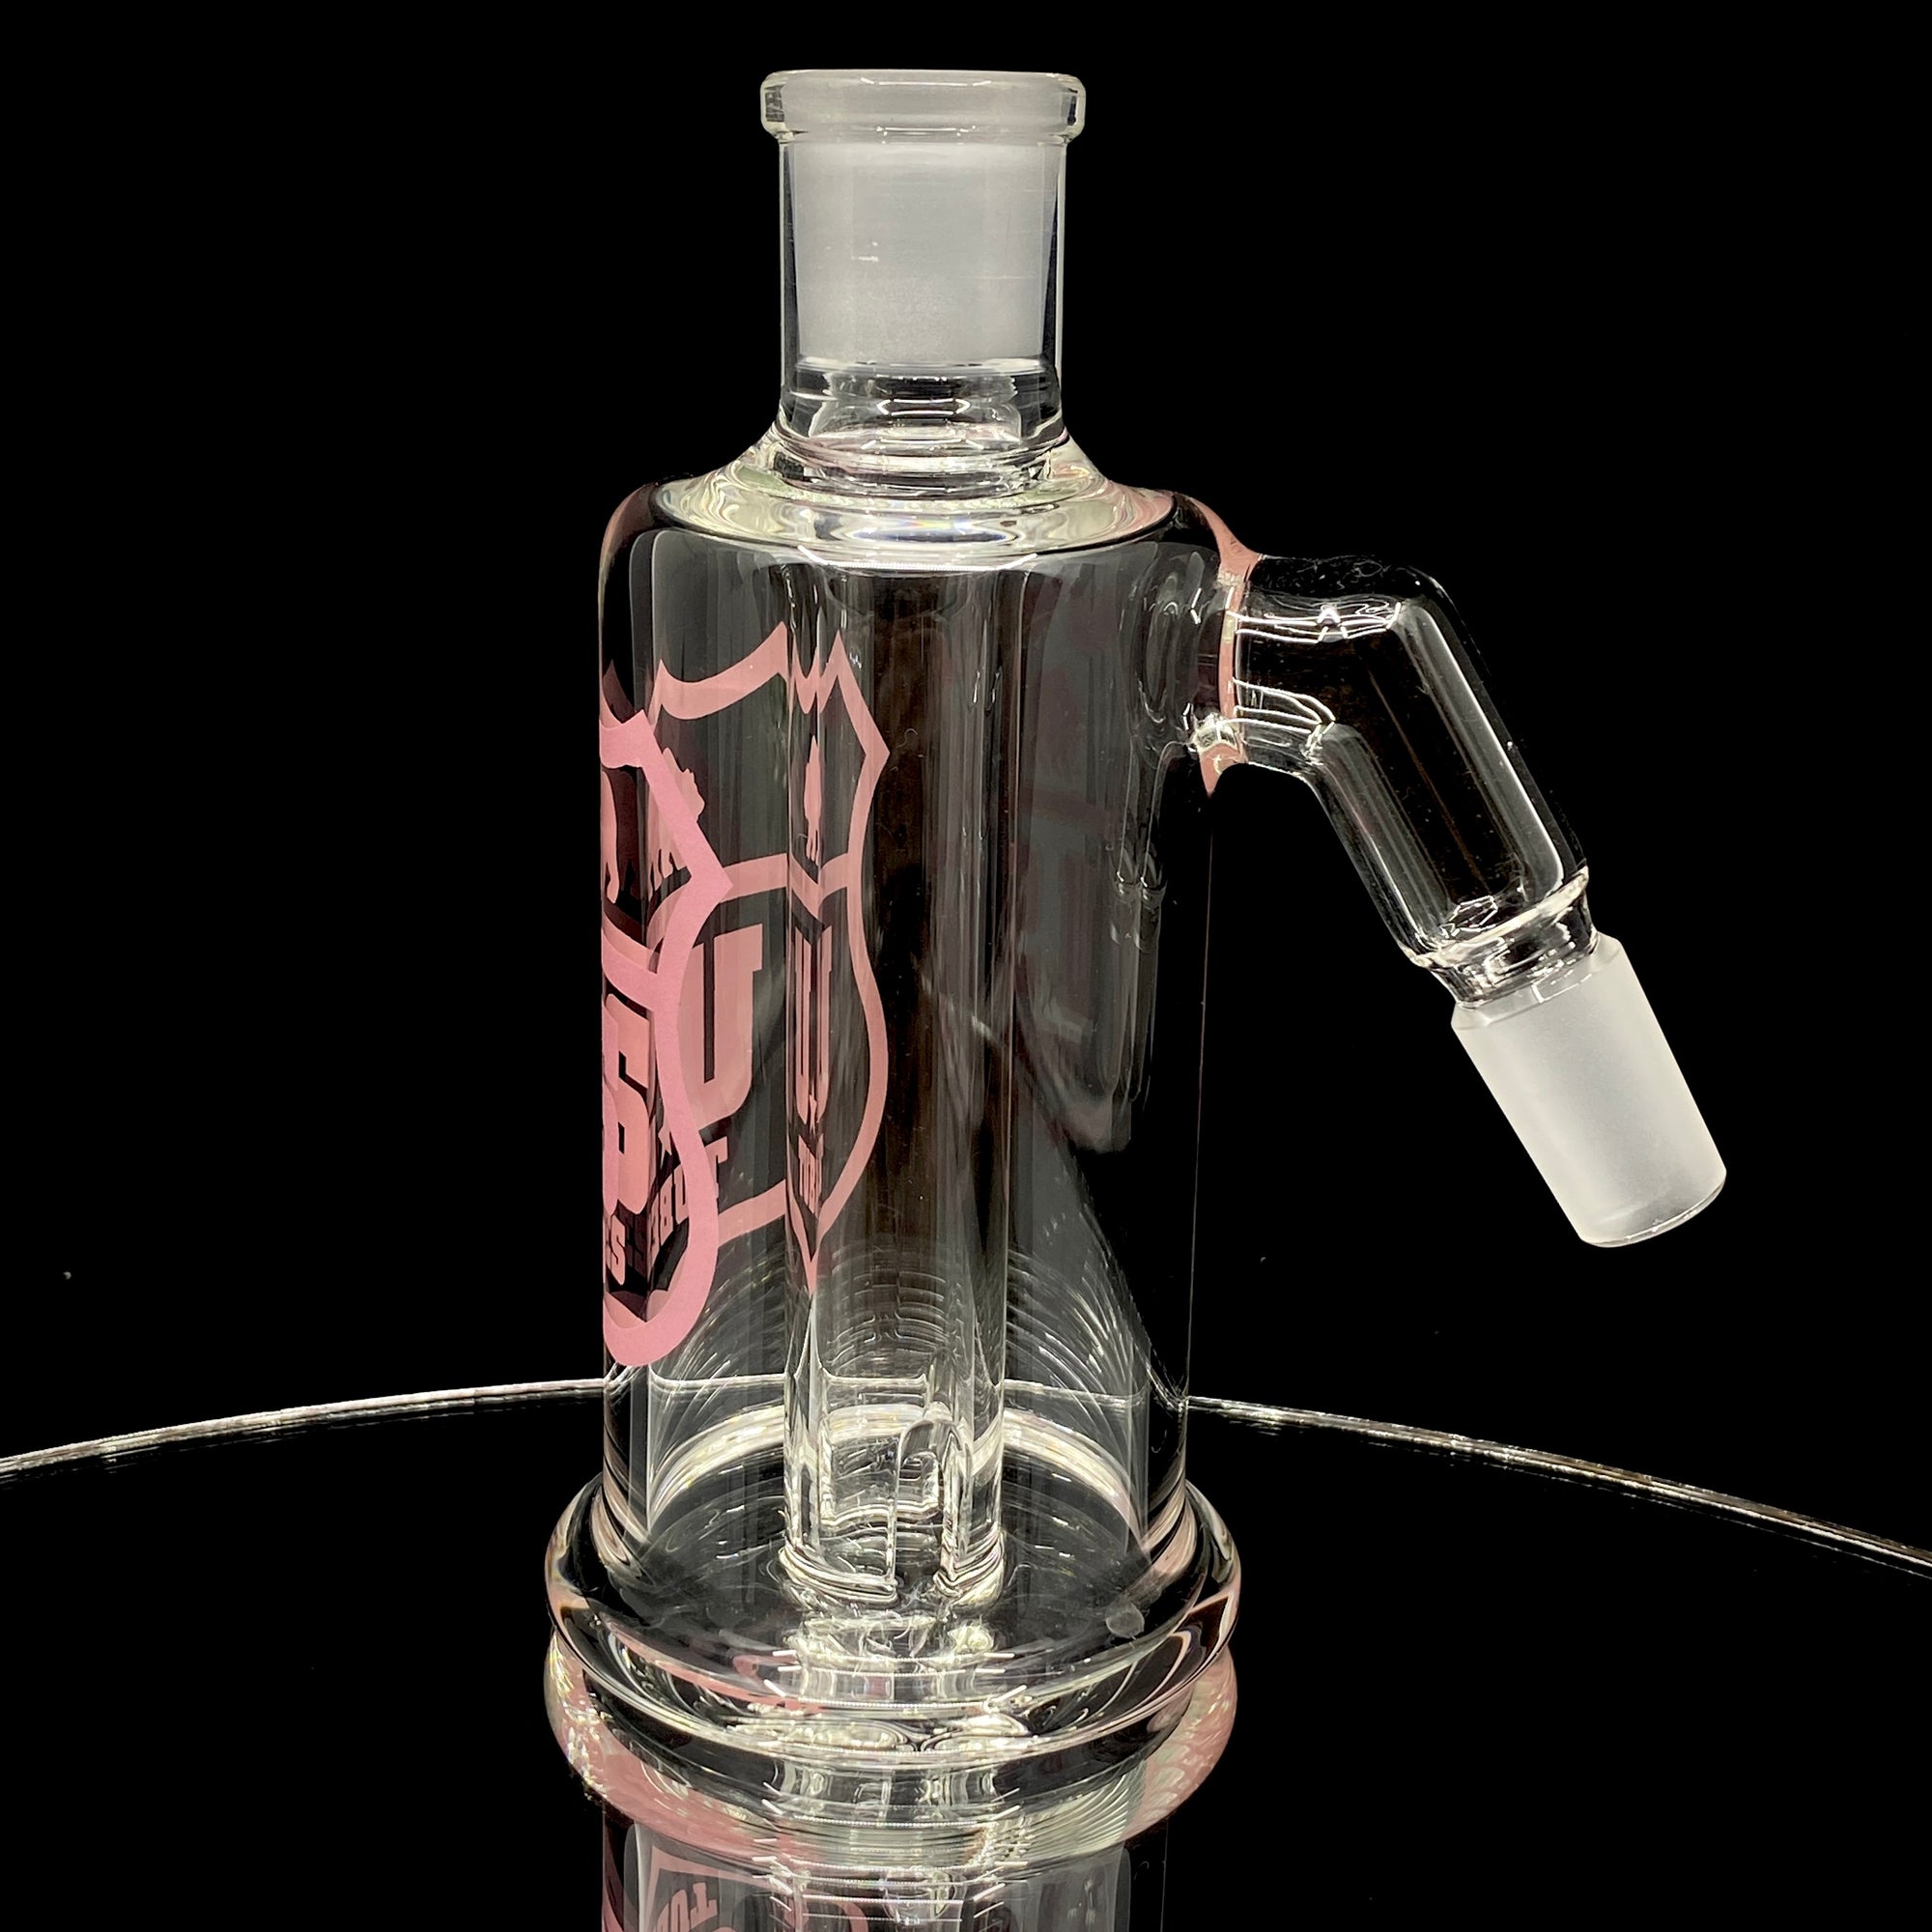 US Tubes Ash catcher, 14mm Joint, 45 Degree